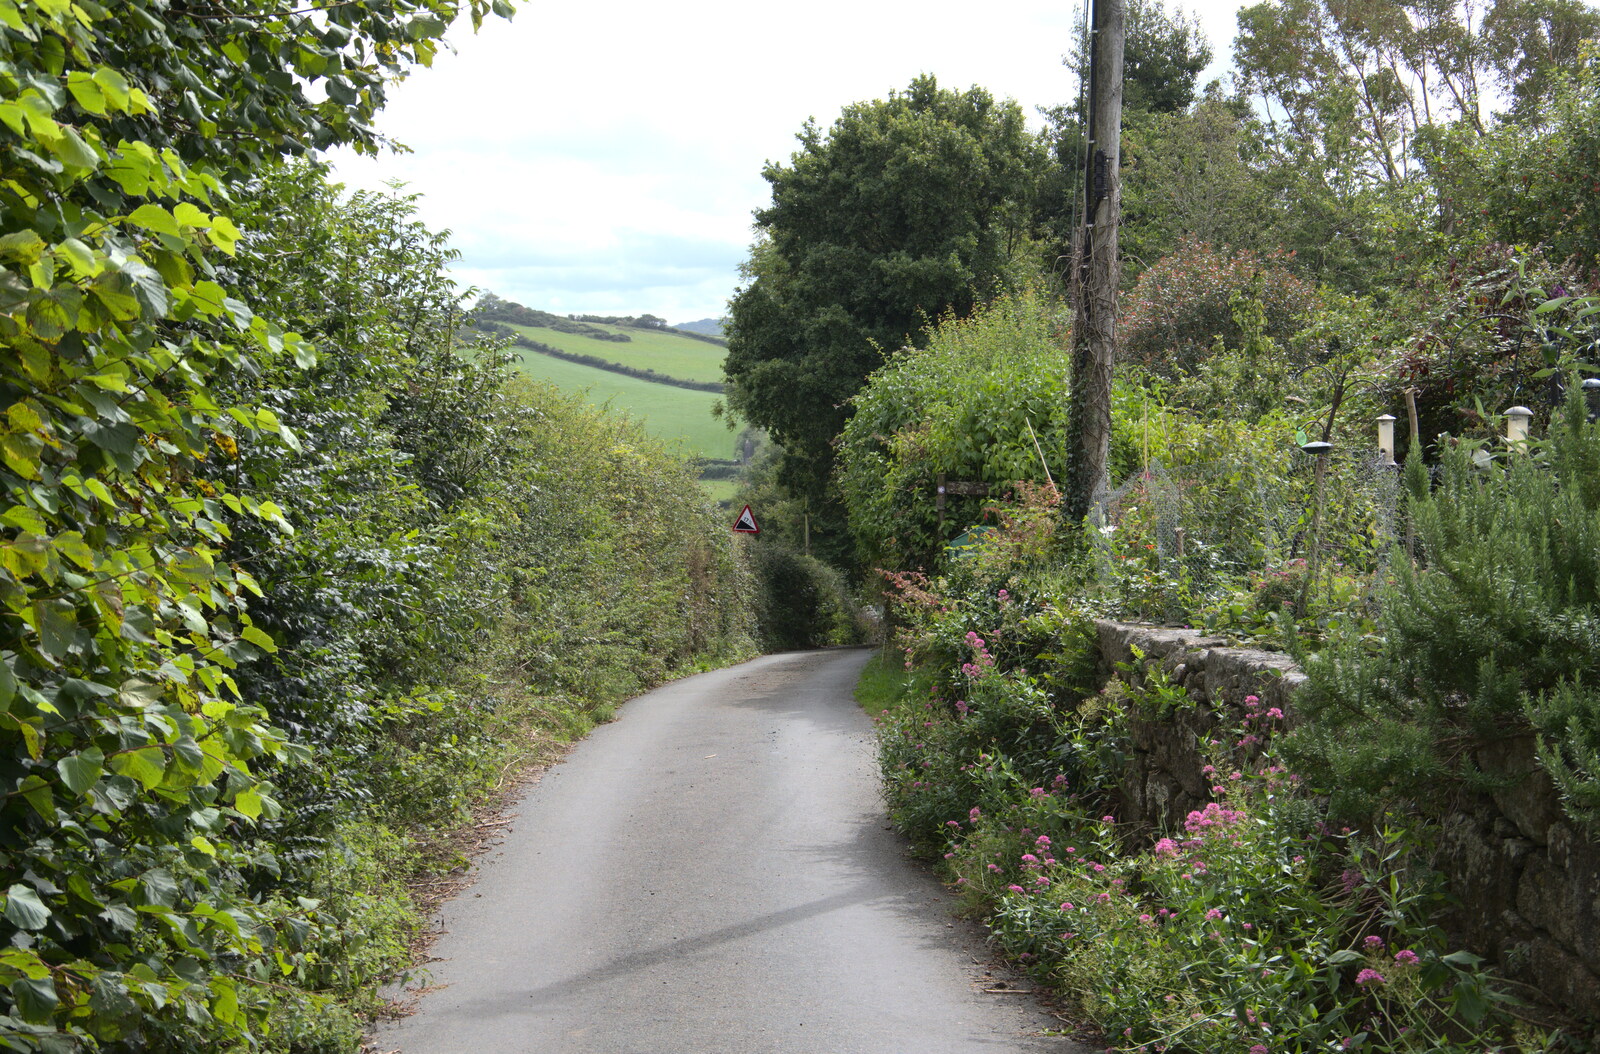 The lane near Sis's pad is fully in leaf from A Walk up Hound Tor, Dartmoor, Devon - 24th August 2020